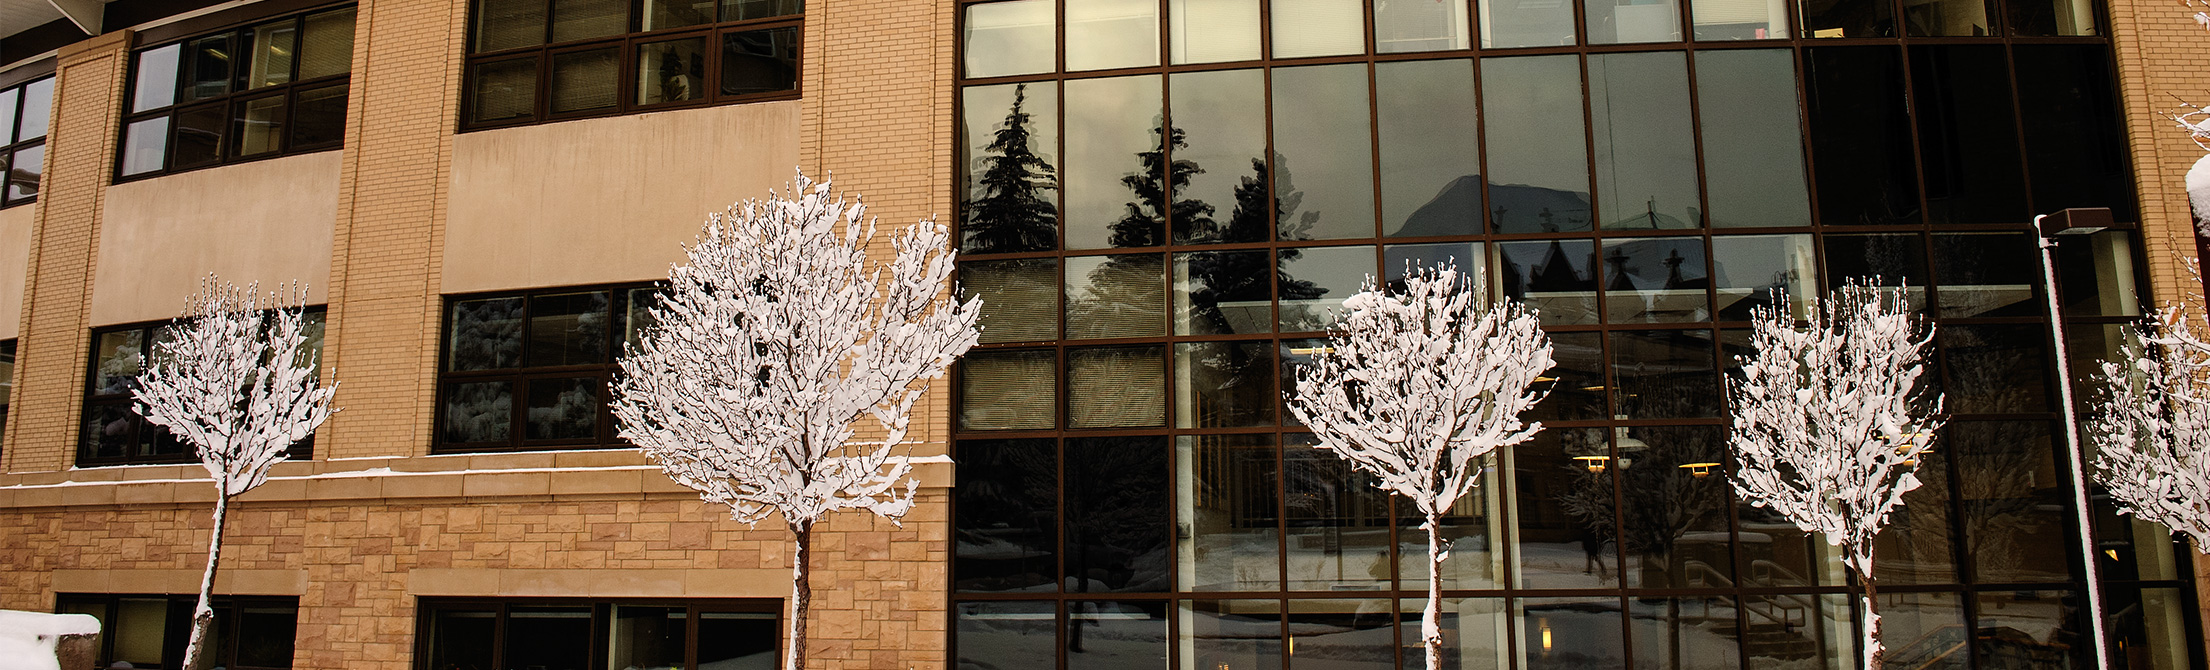 snowy trees in front of building